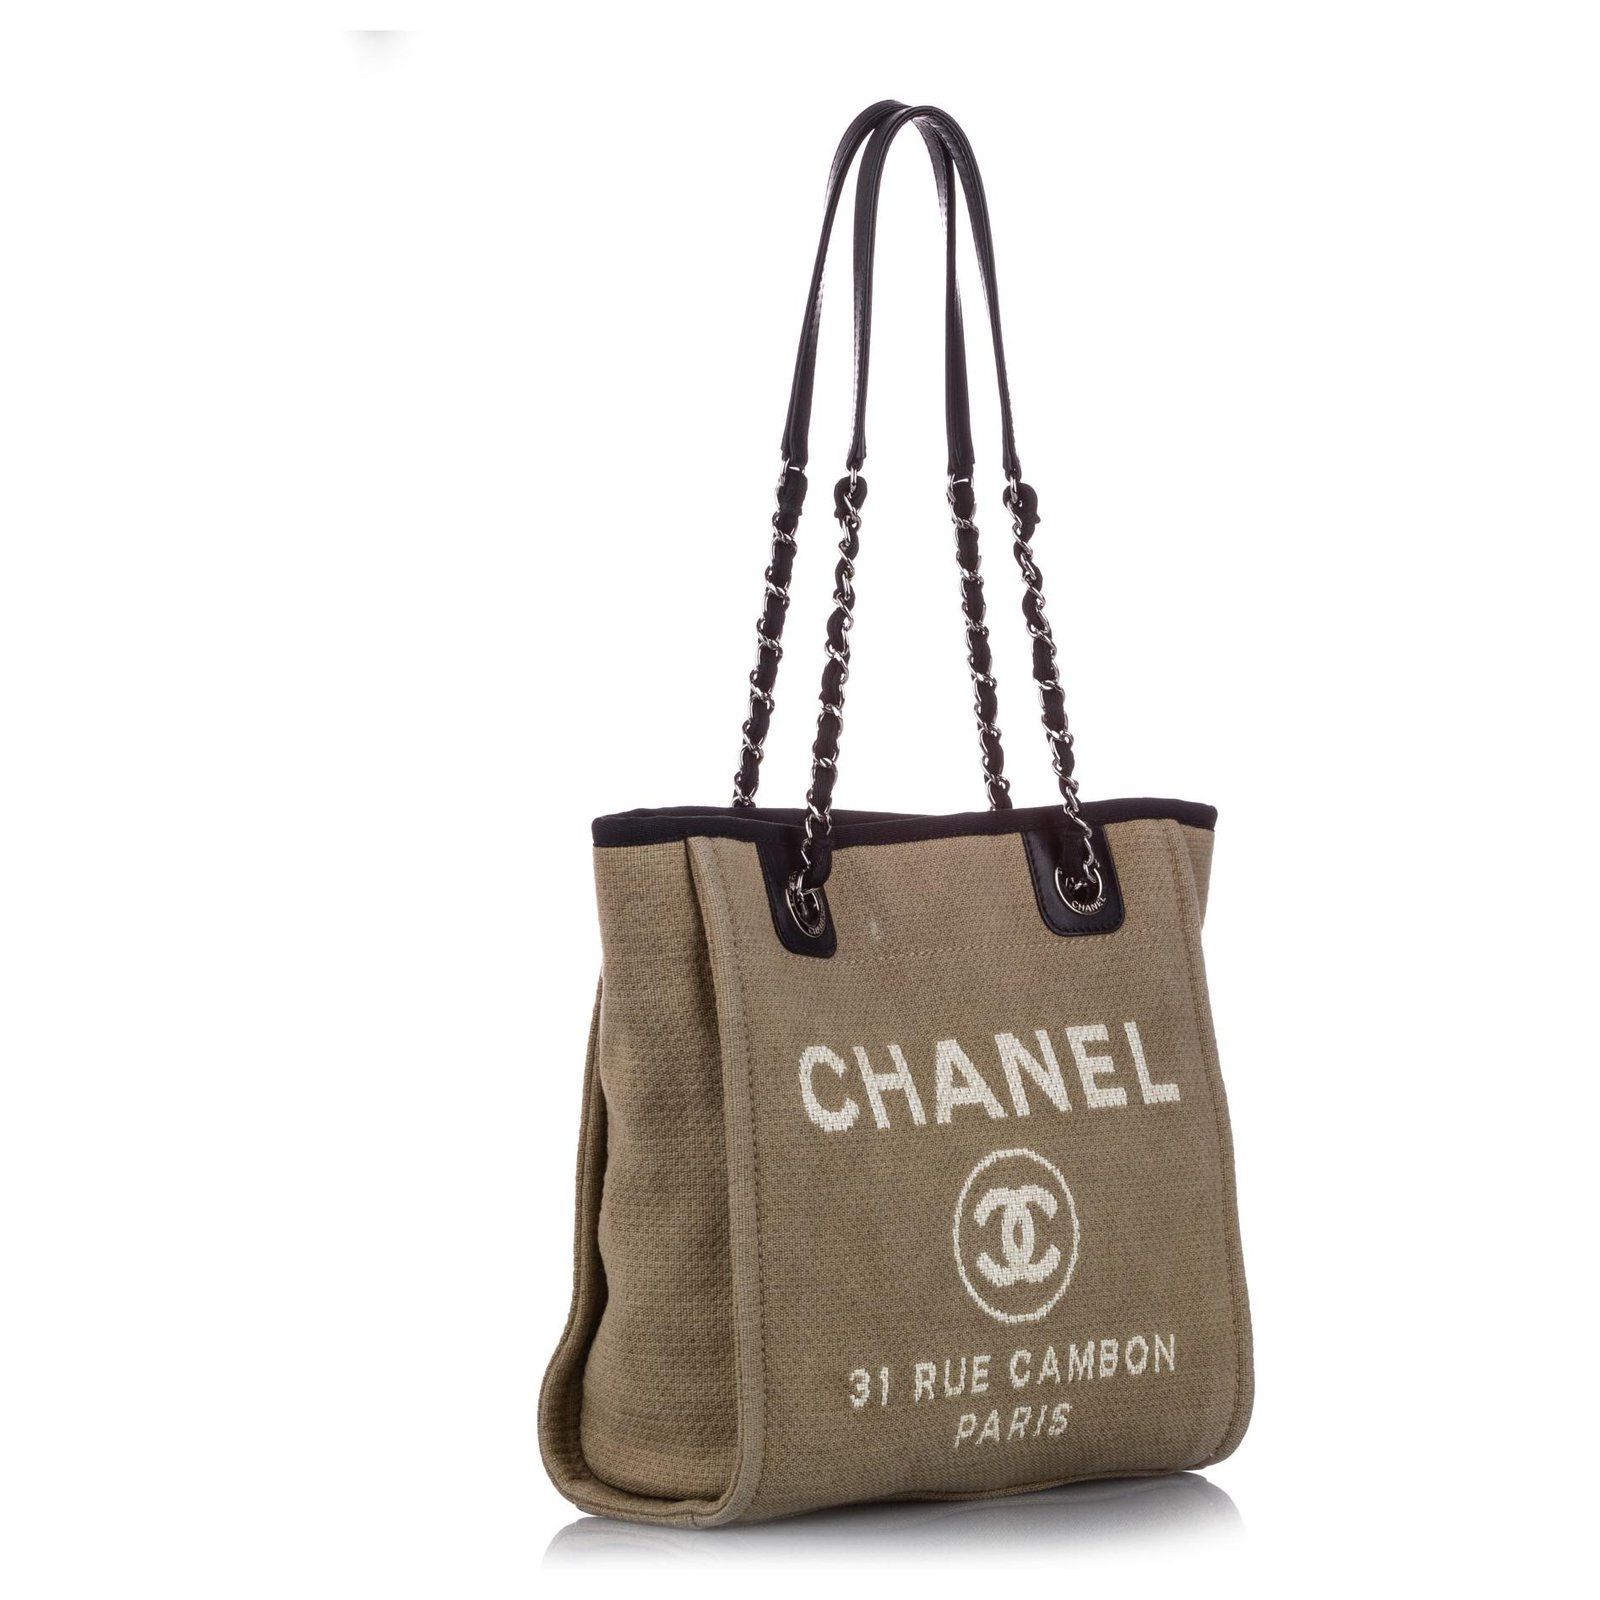 Chanel Pink Canvas Deauville Small Tote Bag Chanel